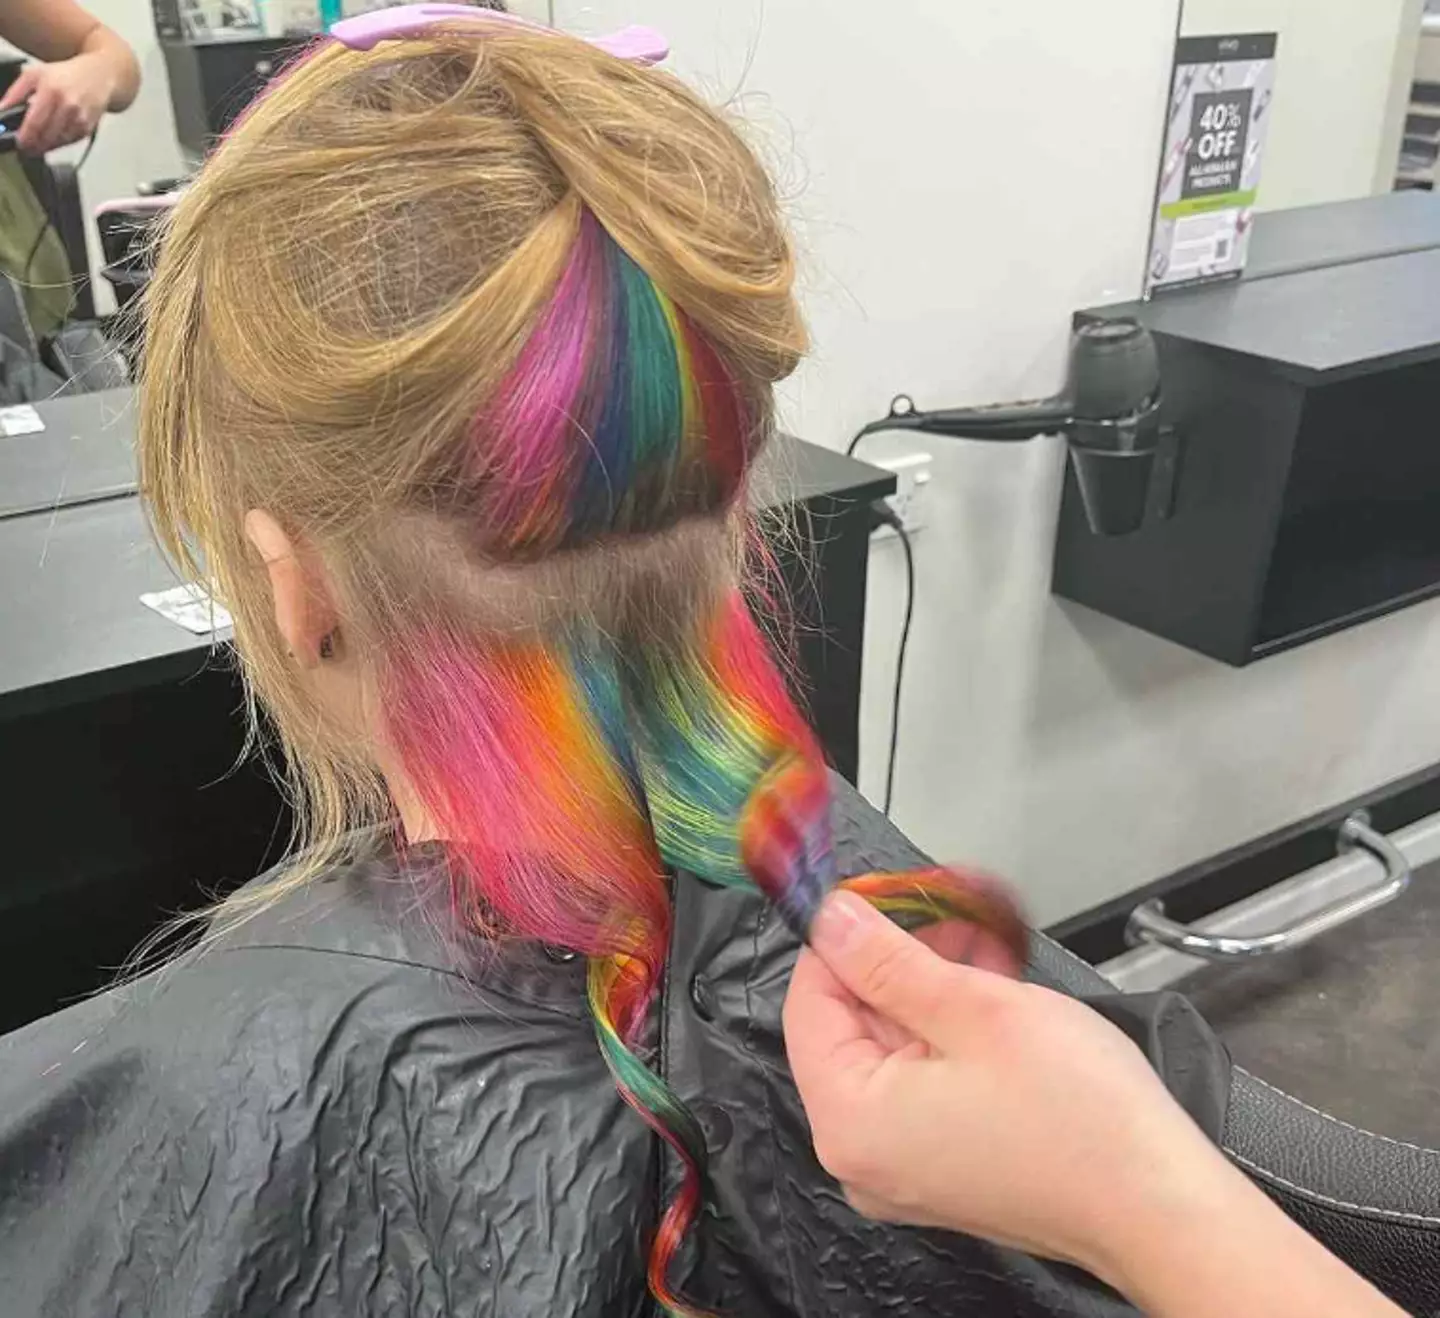 Would you wish for rainbow hair?